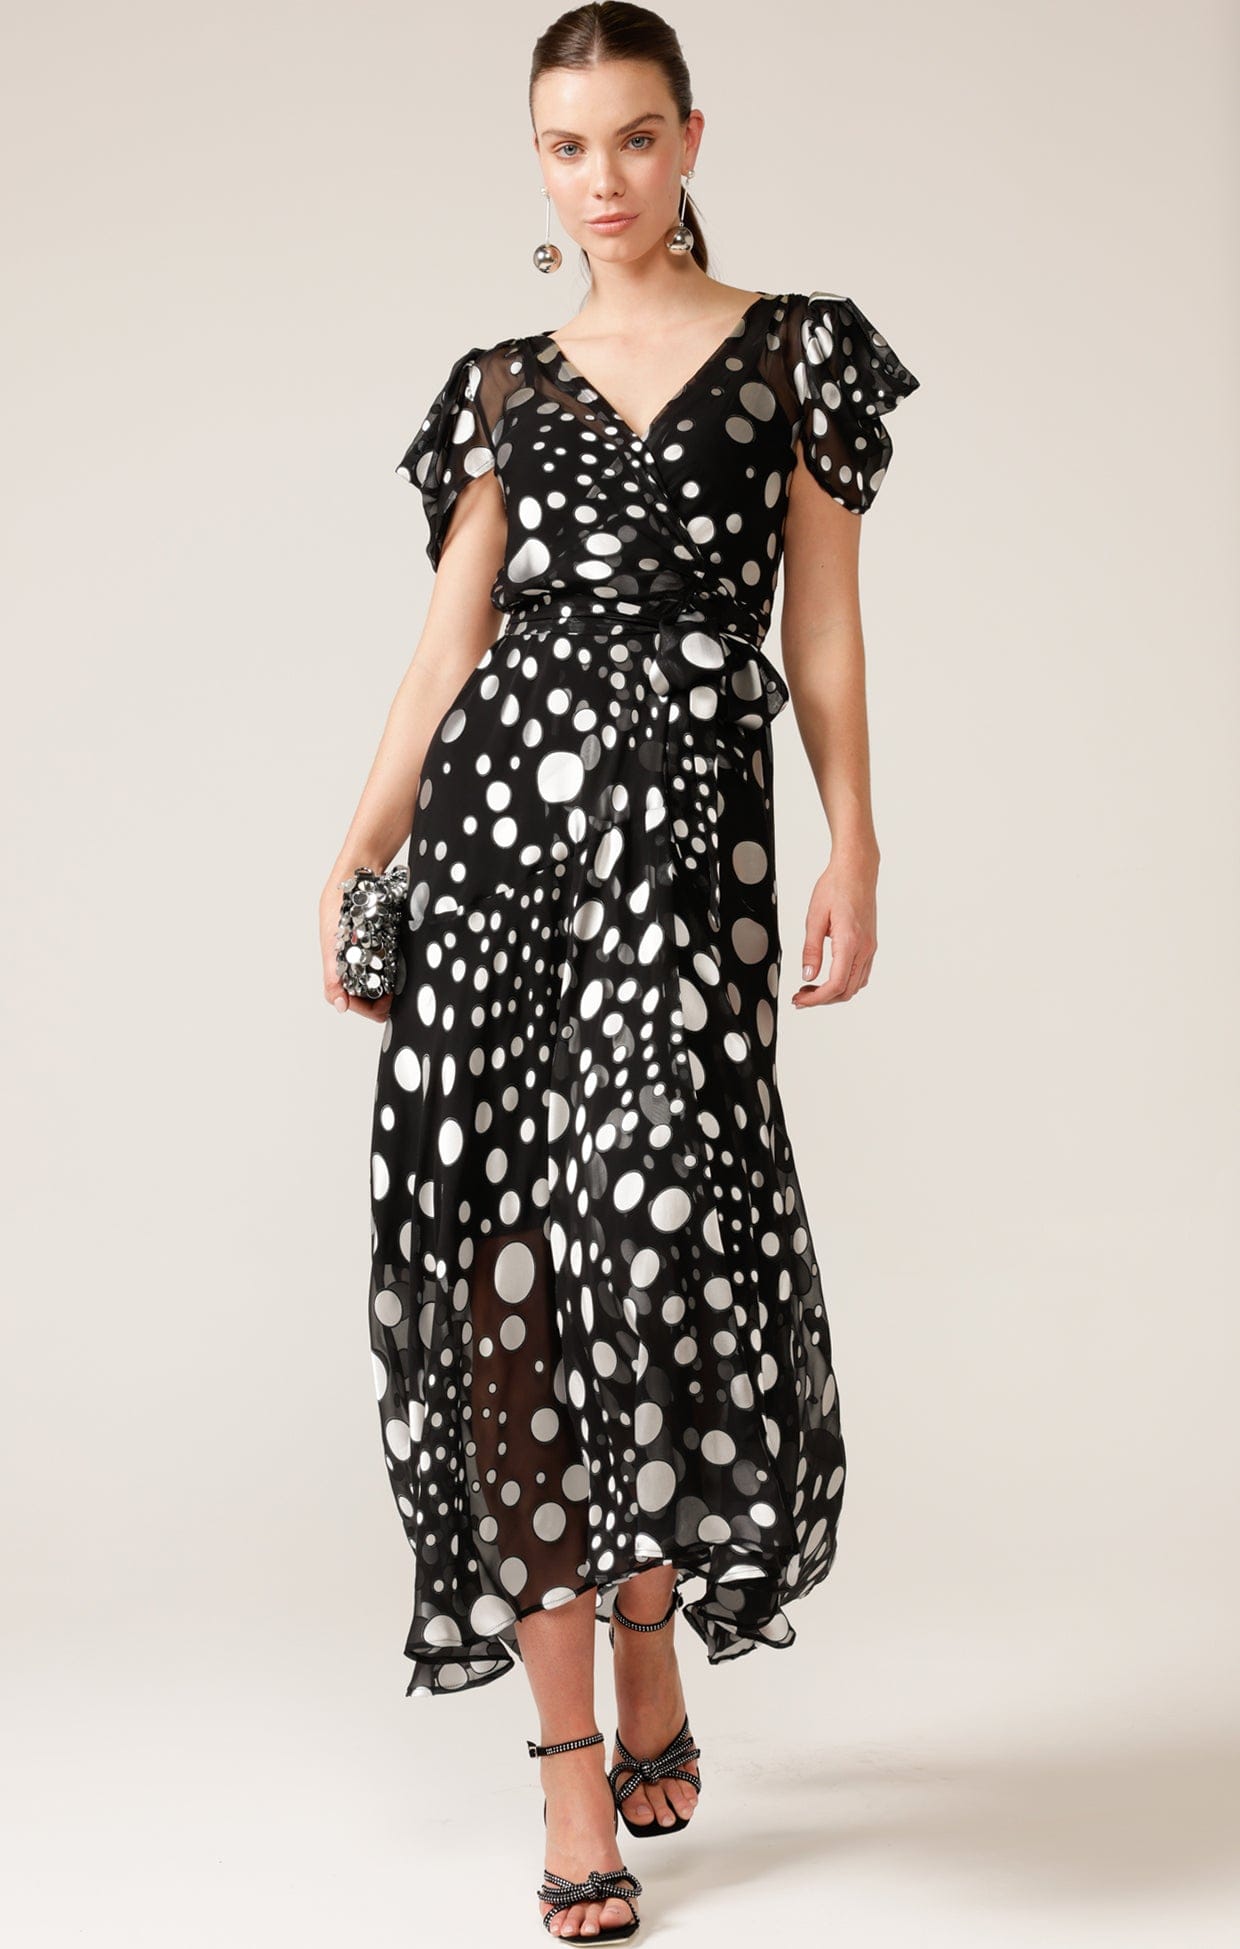 Dresses Events TWILIGHT SHIMMER MAXI WRAP IN BLACK SILVER SPOT